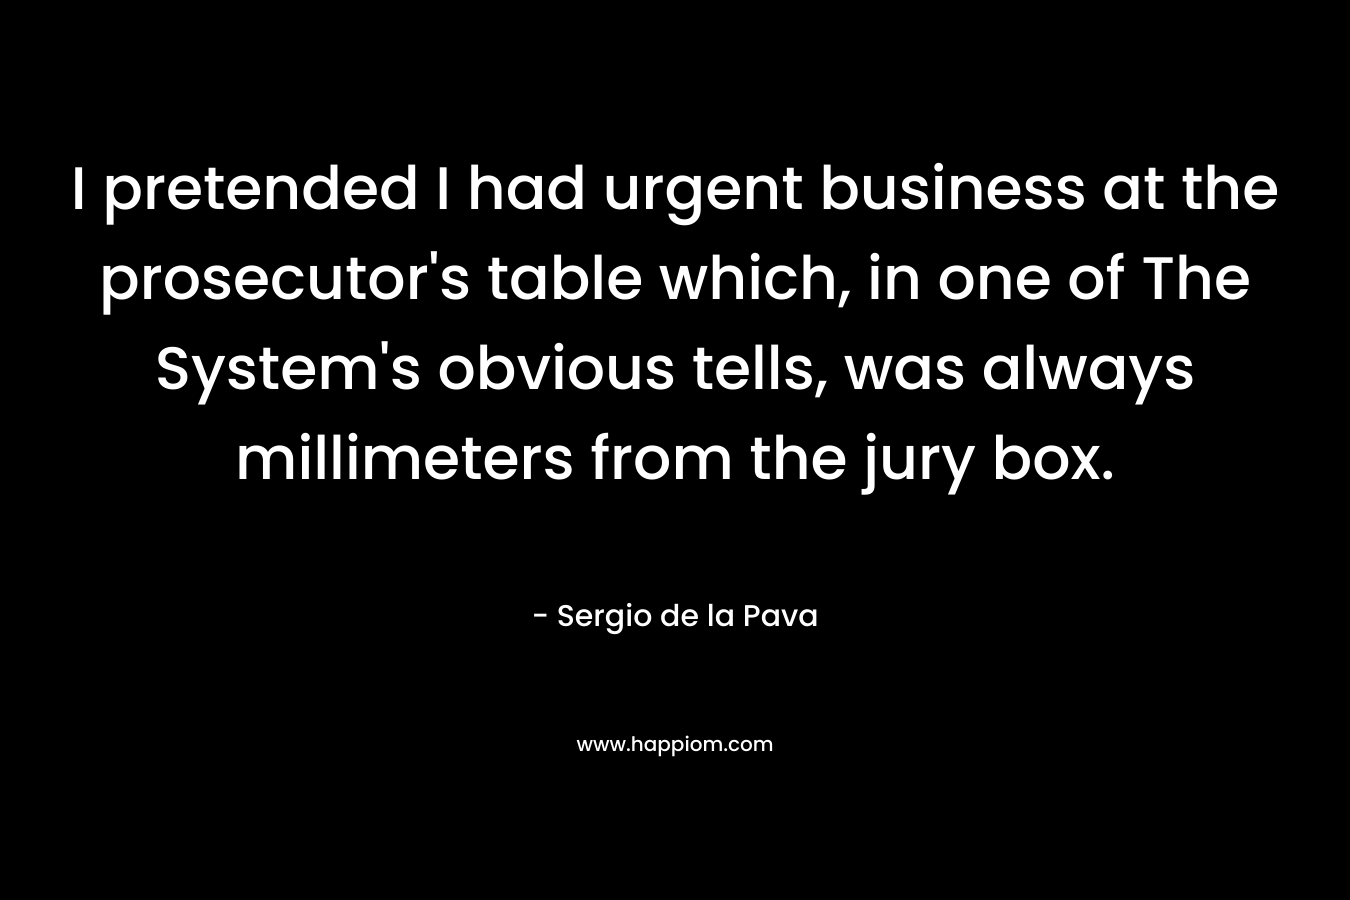 I pretended I had urgent business at the prosecutor's table which, in one of The System's obvious tells, was always millimeters from the jury box.